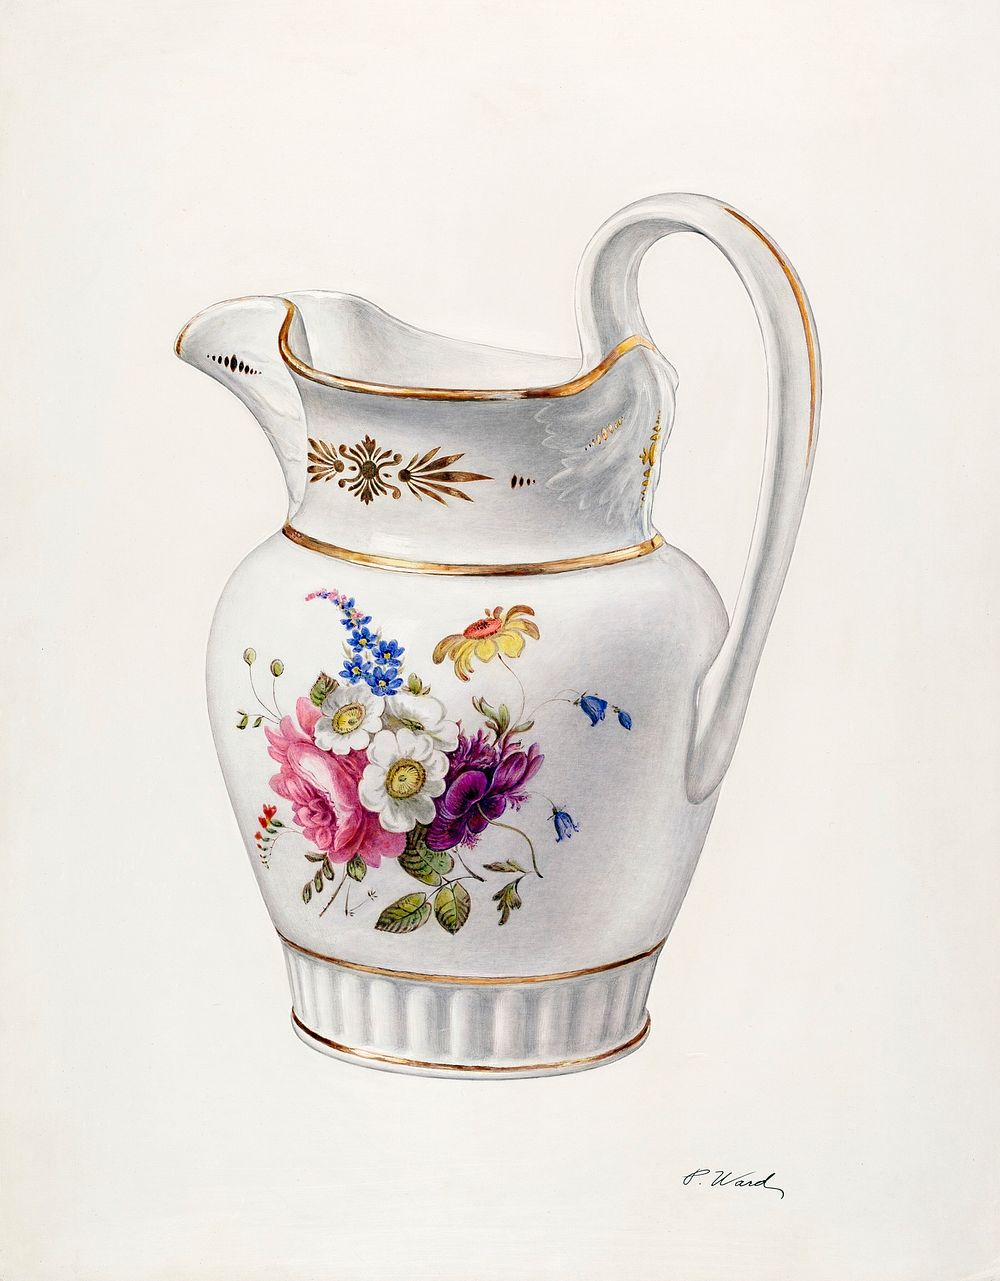 White Glazed Porcelain Pitcher (ca.1940) by Paul Ward. Original from The National Gallery of Art. Digitally enhanced by…